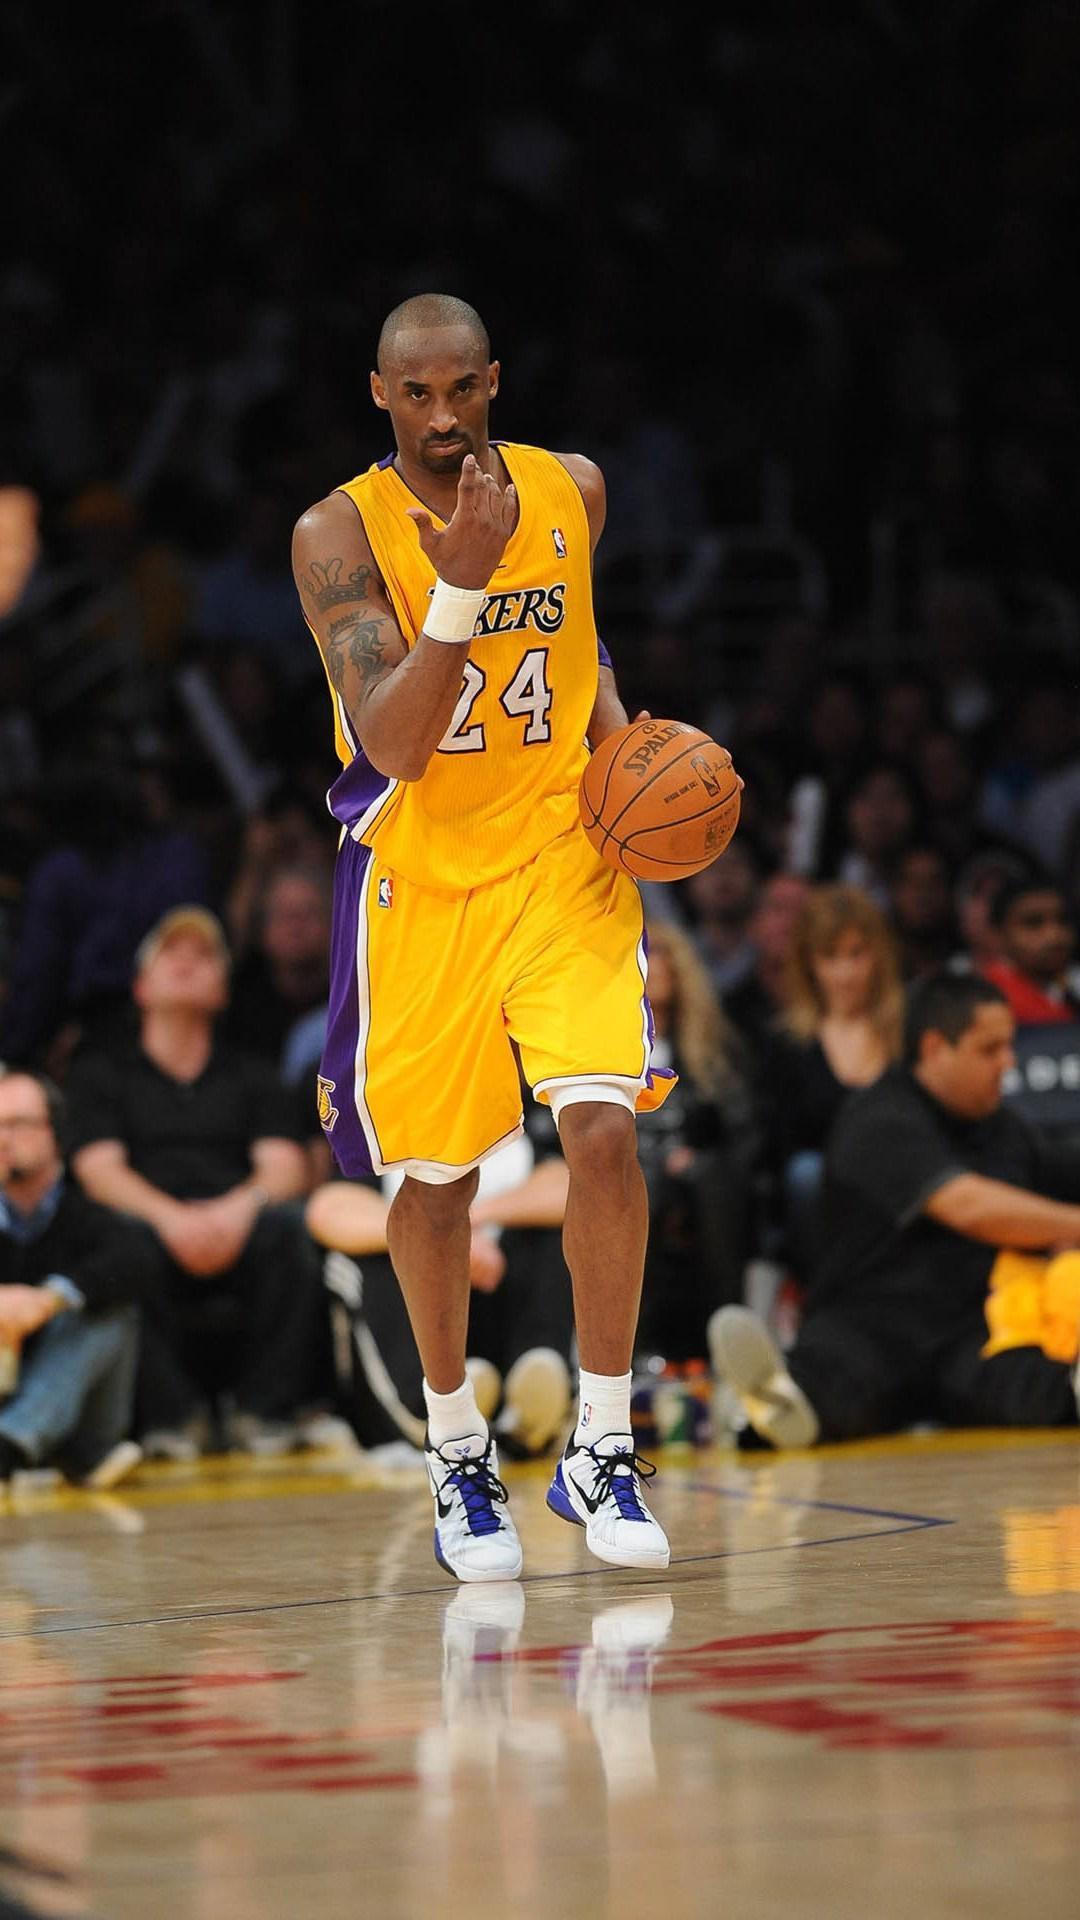 Download Kobe Bryant wallpapers for mobile phone, free Kobe Bryant HD  pictures